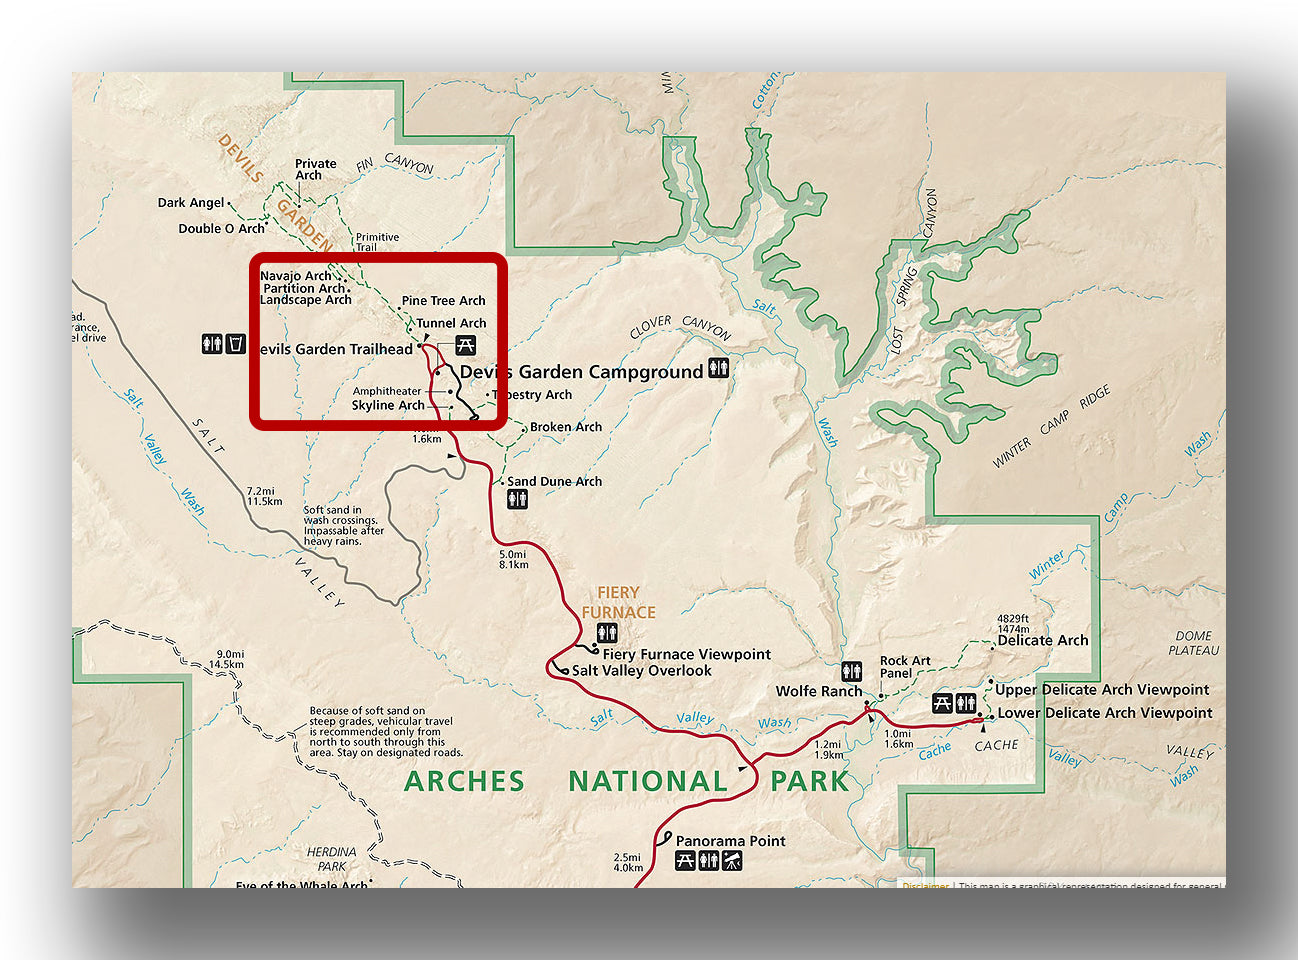 Landscape Arch in Arches National Park parking area map